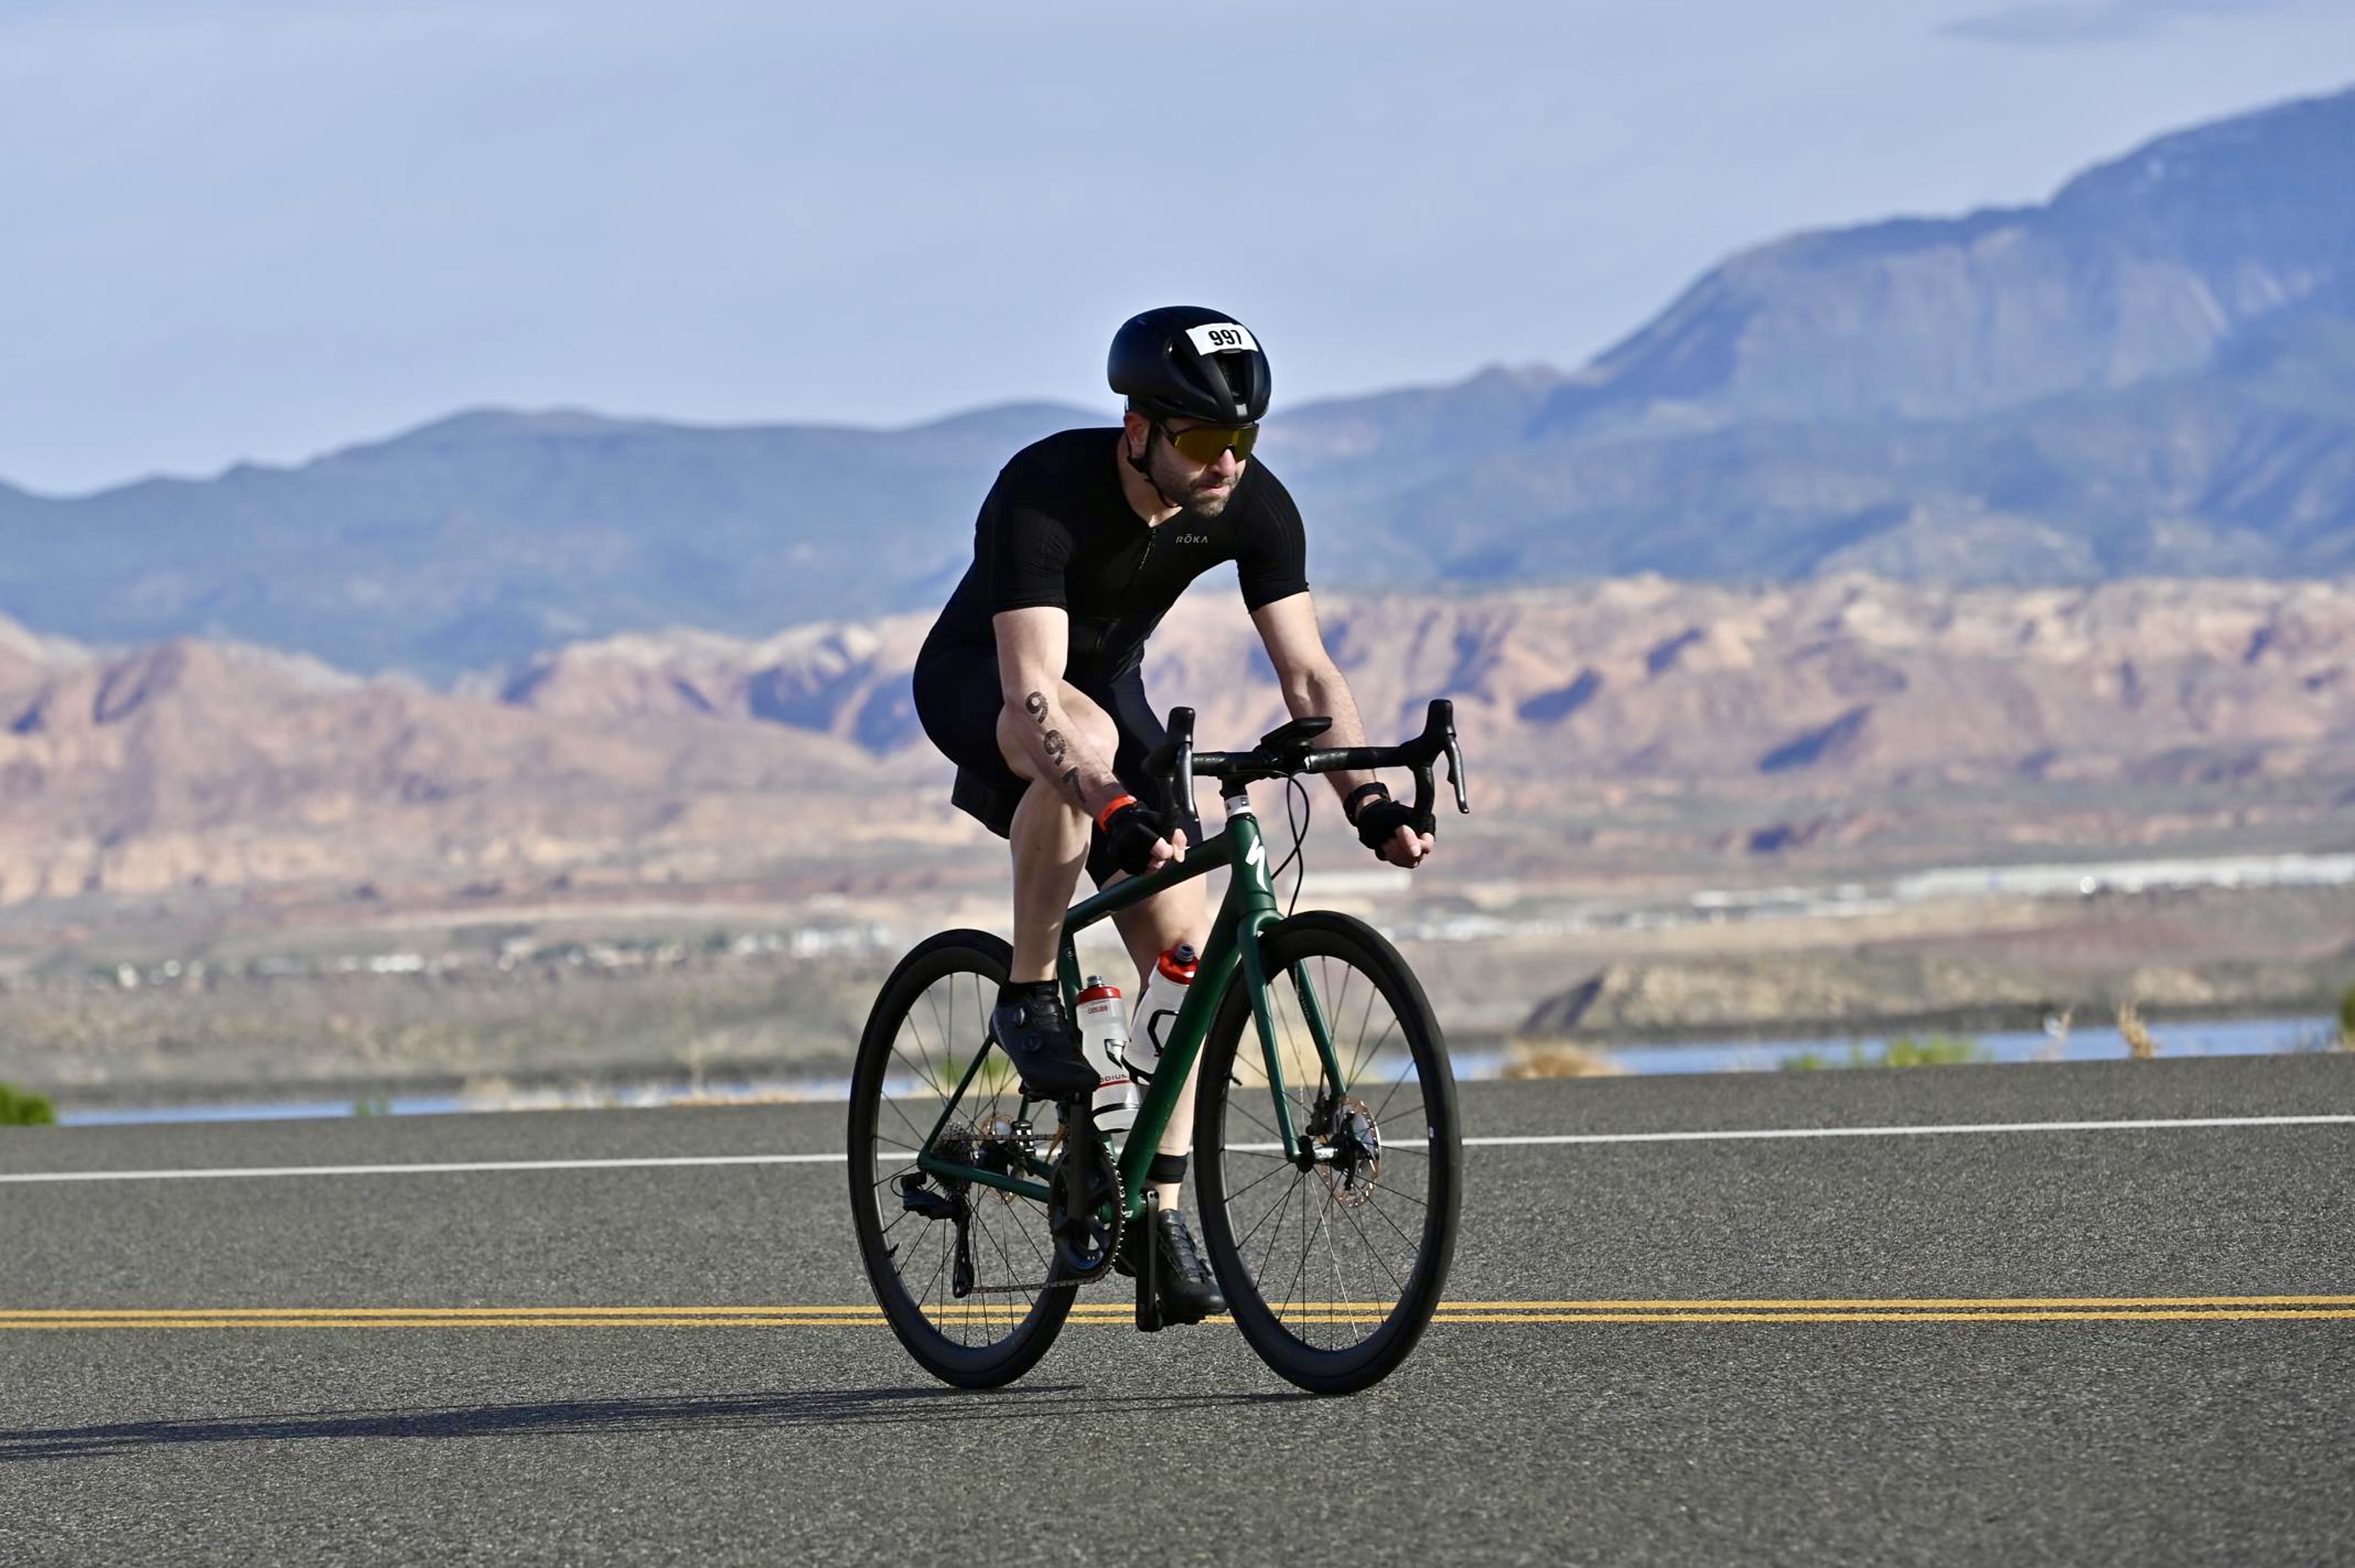 Me, riding a green Specialized Aethos bike through SR7 in southern Utah. Mountains can be seen in the background, along with a little bit of the Sand Hollow reservoir. I'm wearing a black helmet, black trisuit, black gloves, black shoes, and gold sunglasses. I have a race tattoo in my right arm with the number 997.